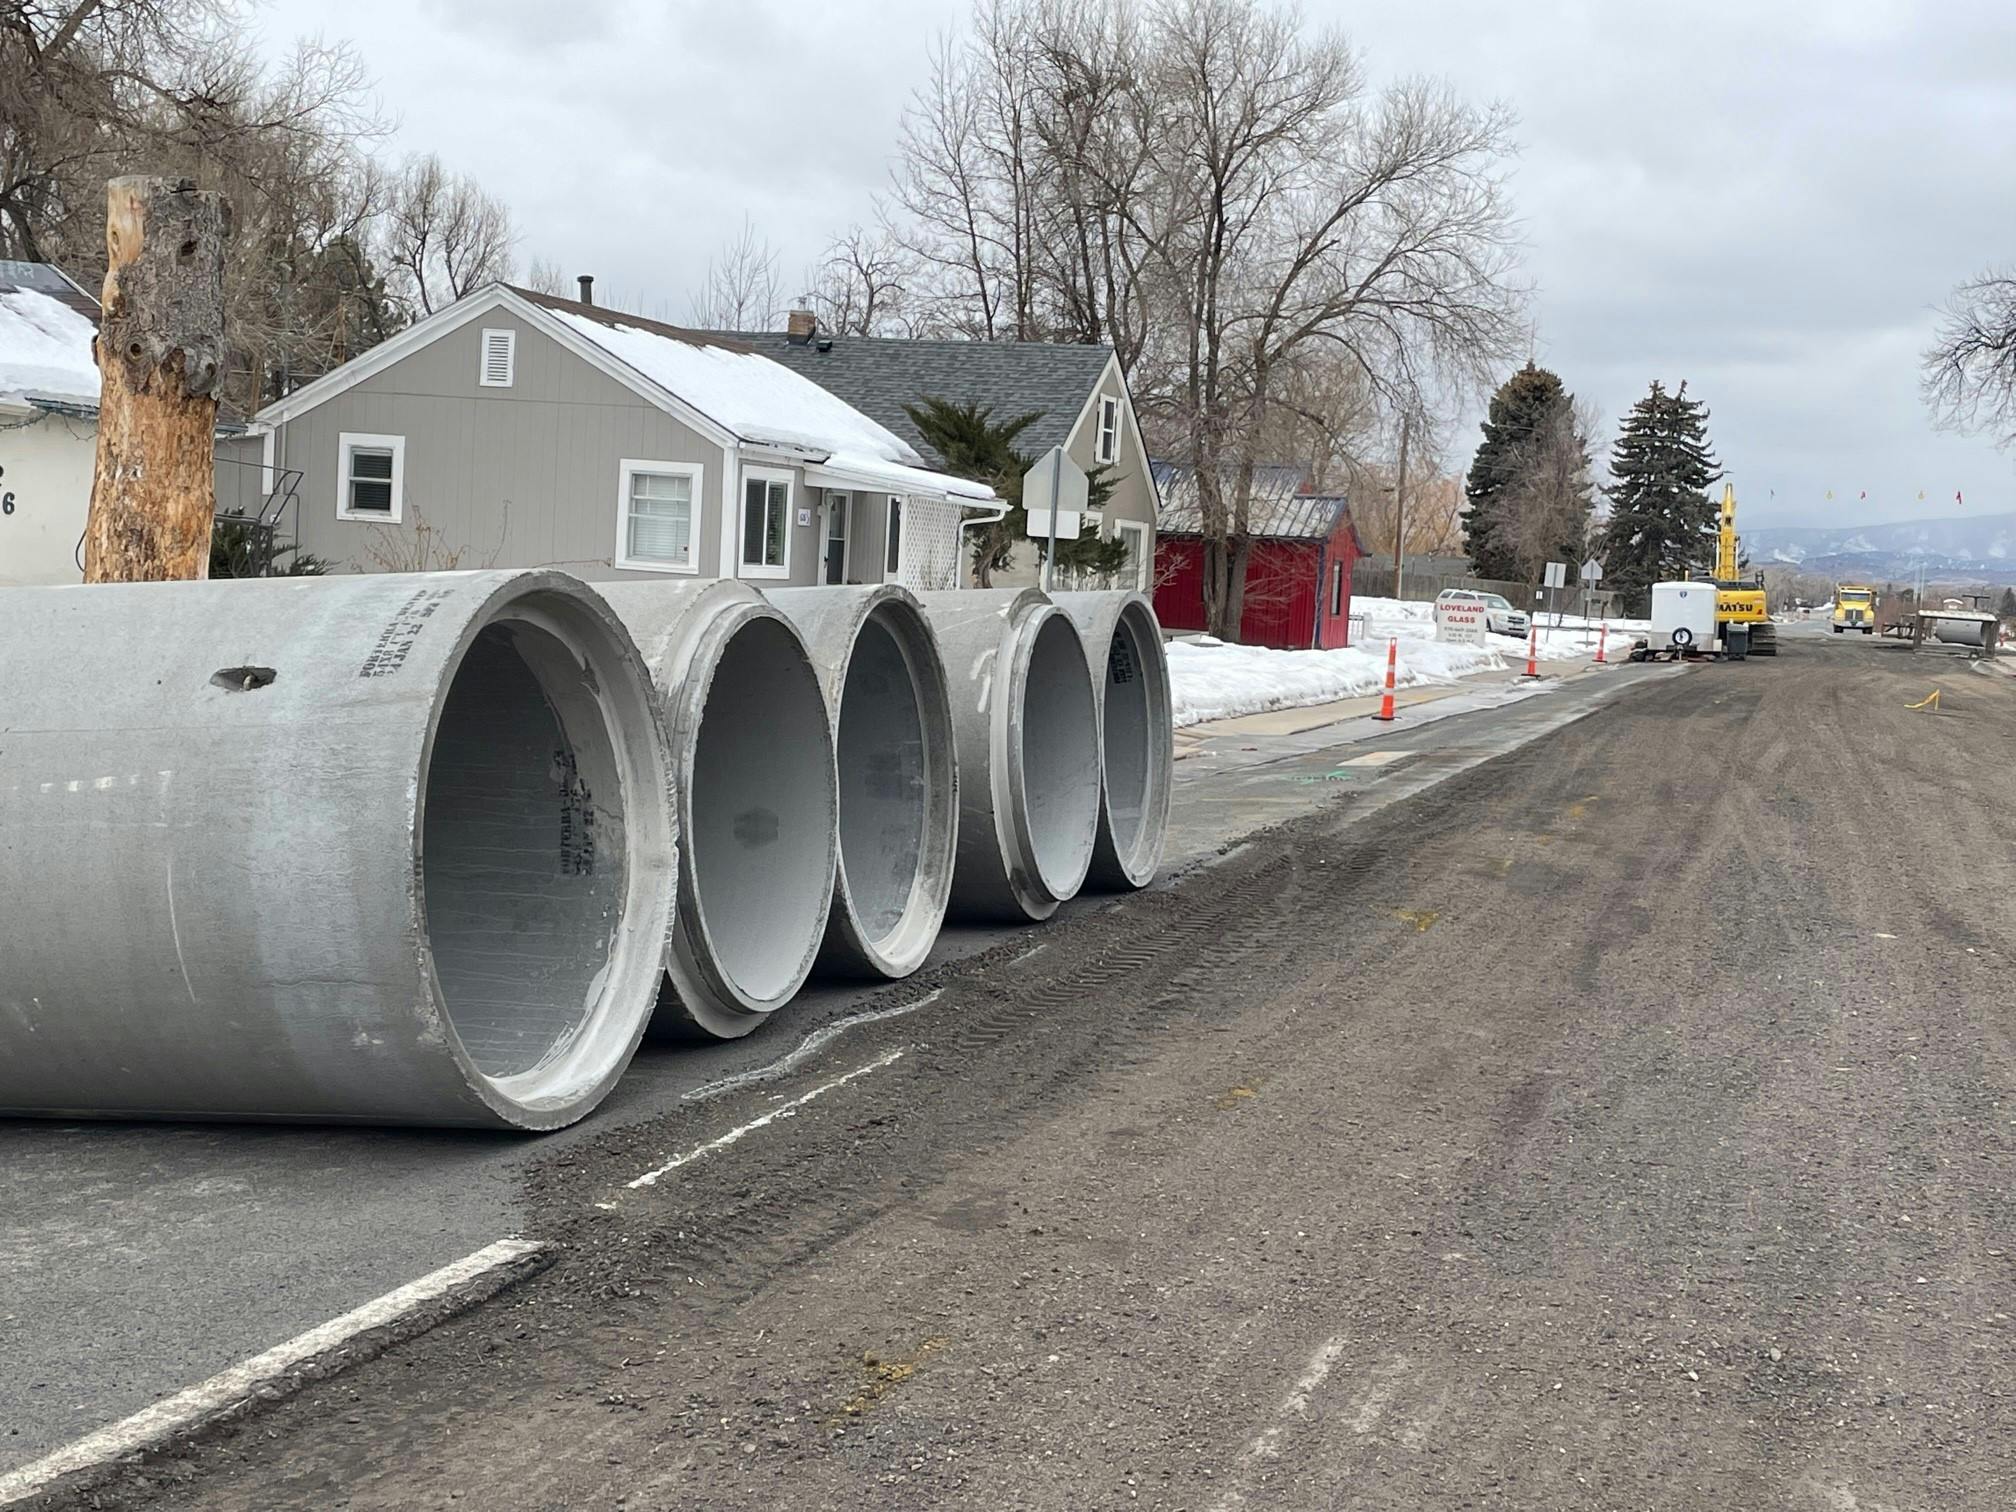 February 1, 2022 – Materials are being delivered to the project site and include large reinforced concrete pipes for the storm drain replacement.